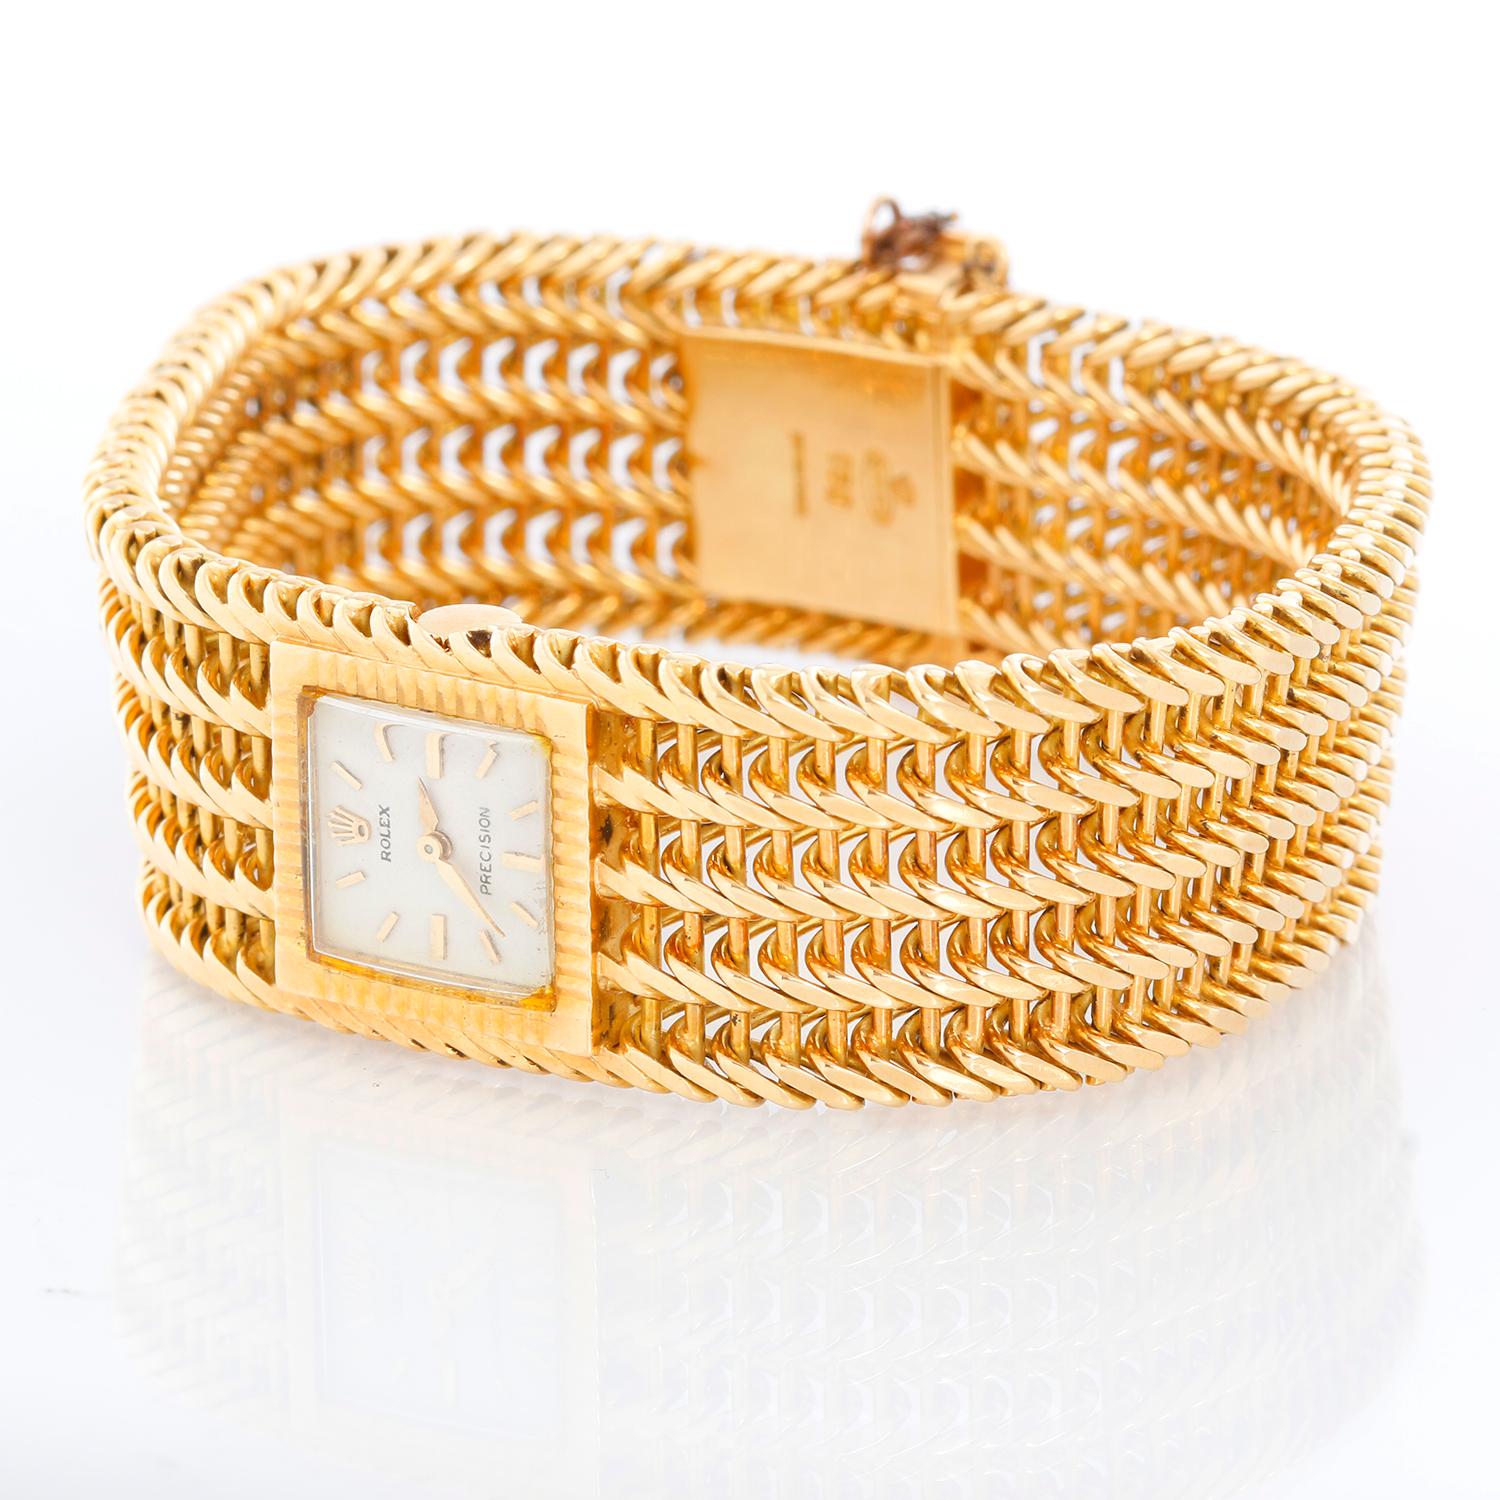 Vintage Ladies 18k Yellow Gold Square Ladies Watch on Mesh Bracelet - Manual winding. 18Kyellow gold case (16mm x 20mm). White dial with stick hour markers. 18Kyellow gold integrated mesh bracelet with Rolex crown on clasp (will fit apx. 7 in.